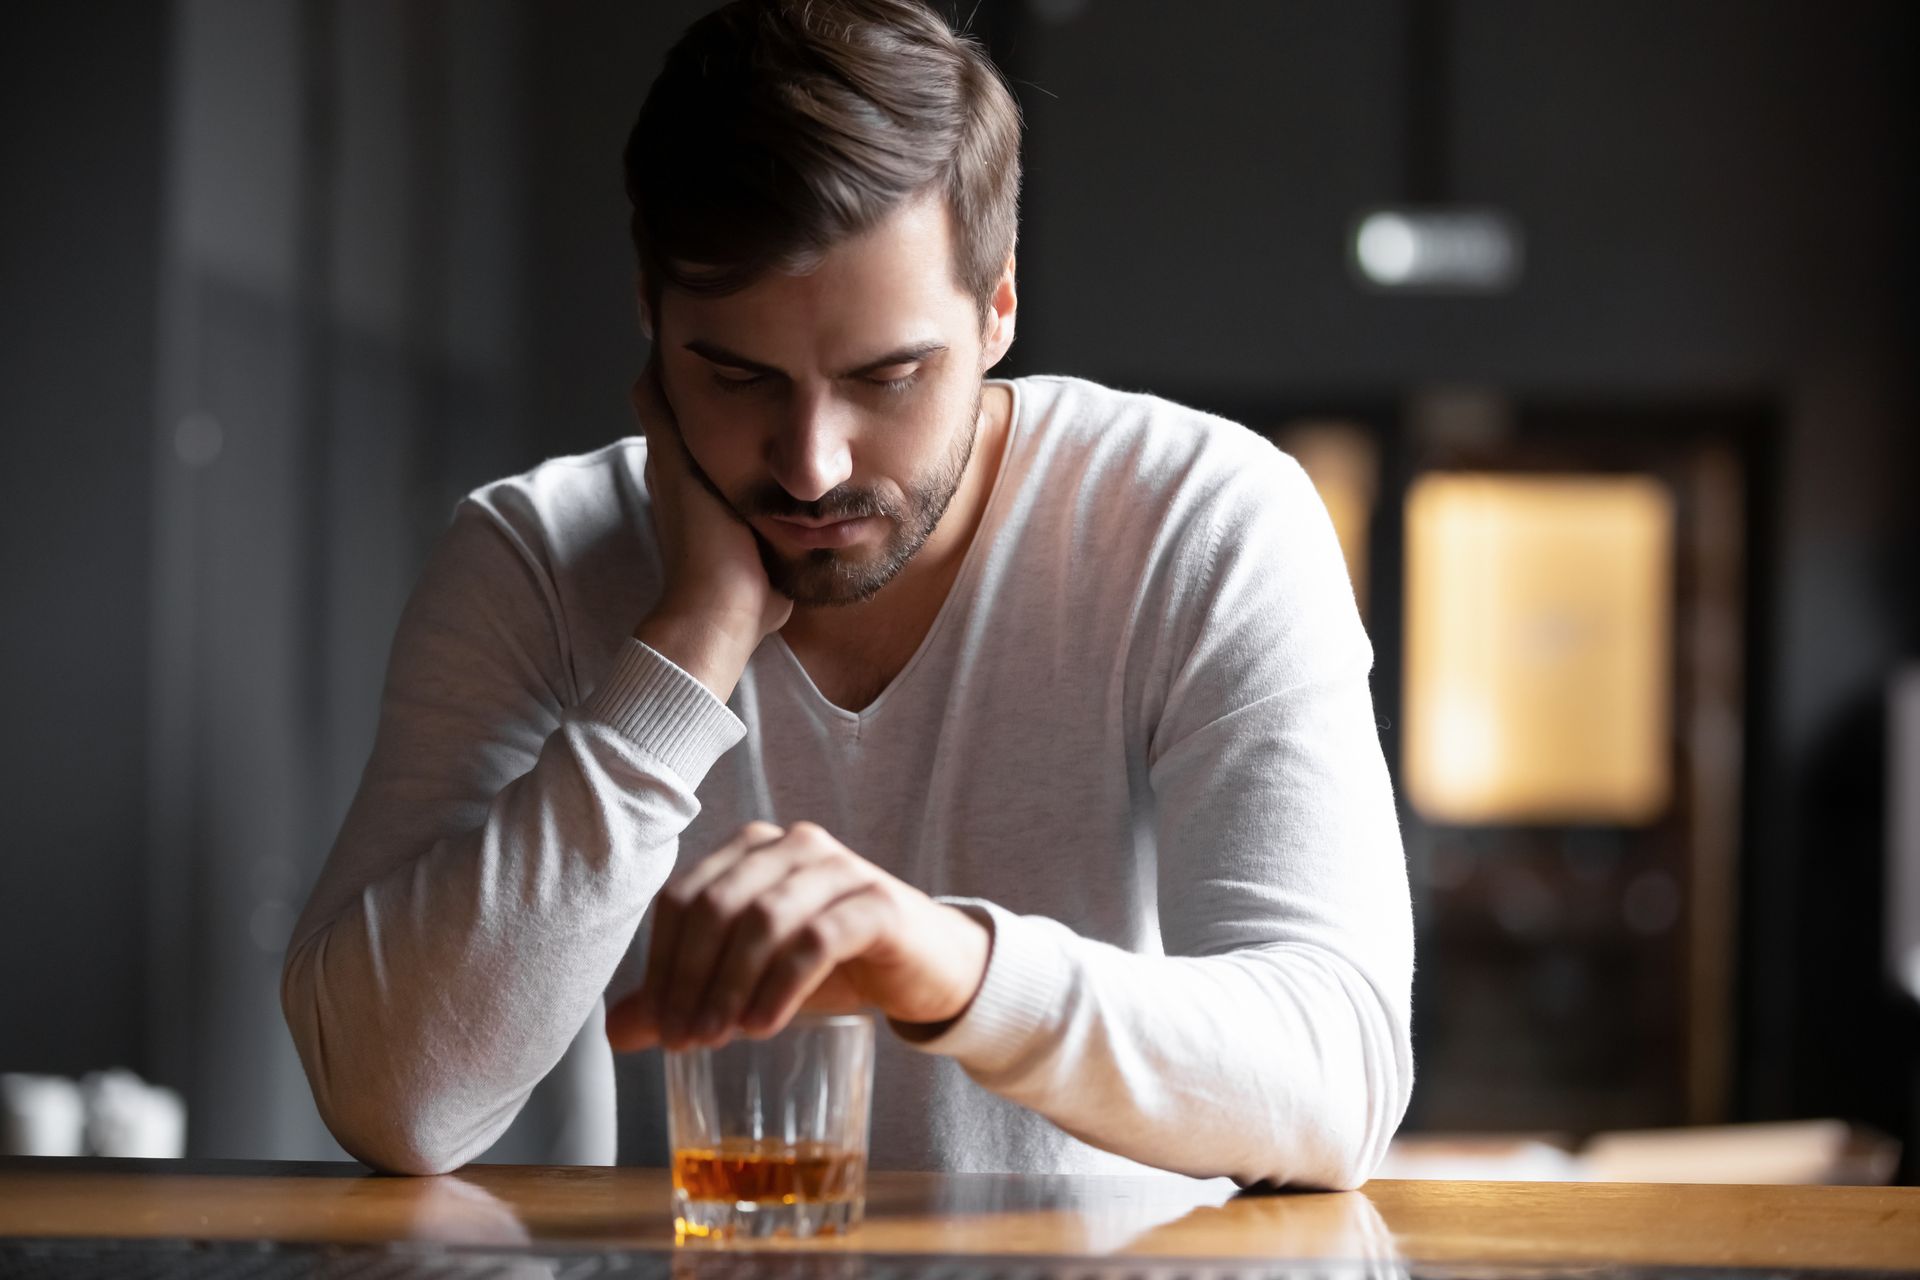 Top 6 Warning Signs of Alcoholism Explained